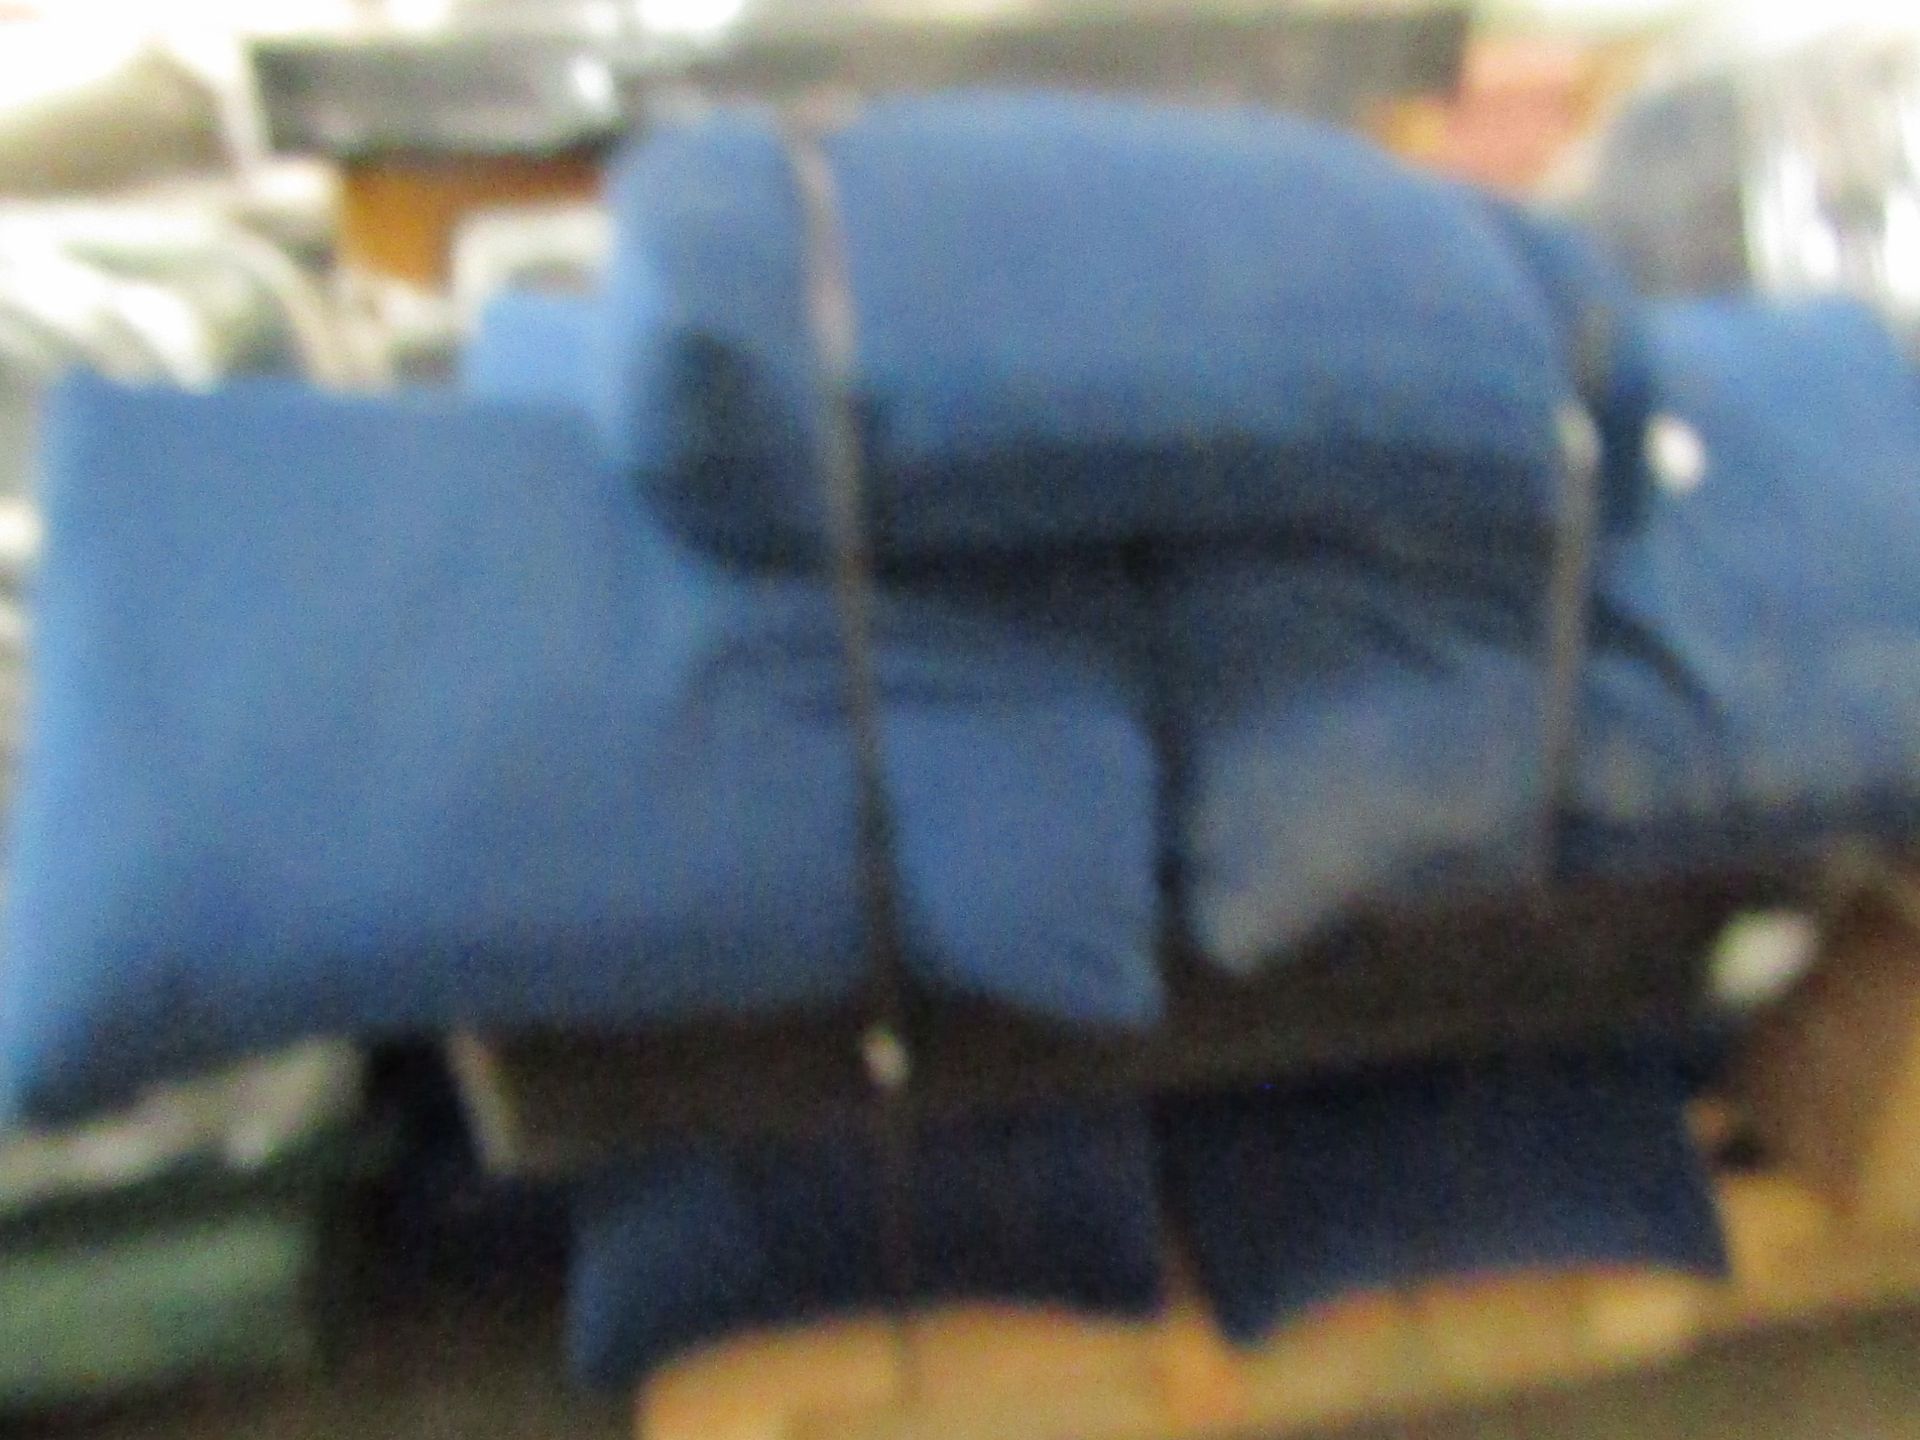 10% Buyers Premium +VAT, 24 Pallets of Genuine SNUG SOFA parts - Mixed Lots of Bases Backs Arms - Image 8 of 20